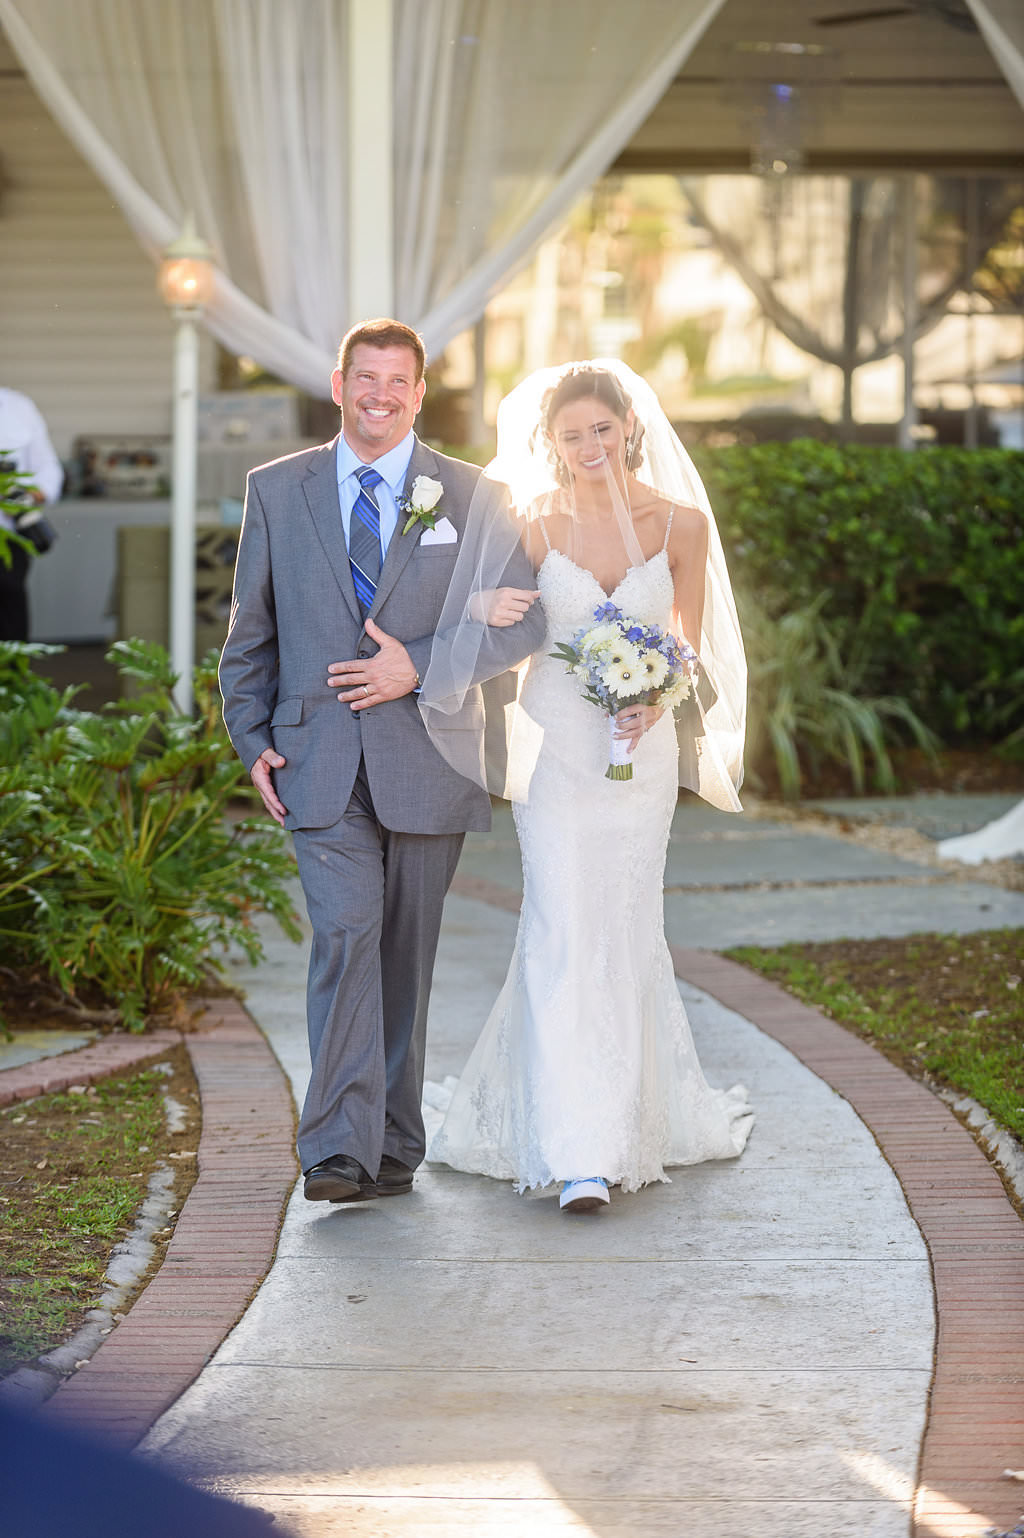 Bride and Father Wedding Ceremony Portrait Walking Down the Aisle at Davis Islands Wedding Venue Davis Islands Garden Club, Bride Wearing Strappy White Wedding Dress Holding White and Blue Floral Bouquet | Purple, Ivory and Lilac Roses Bridal Wedding Bouquet | Tampa Wedding Photographer Marc Edwards Photographs